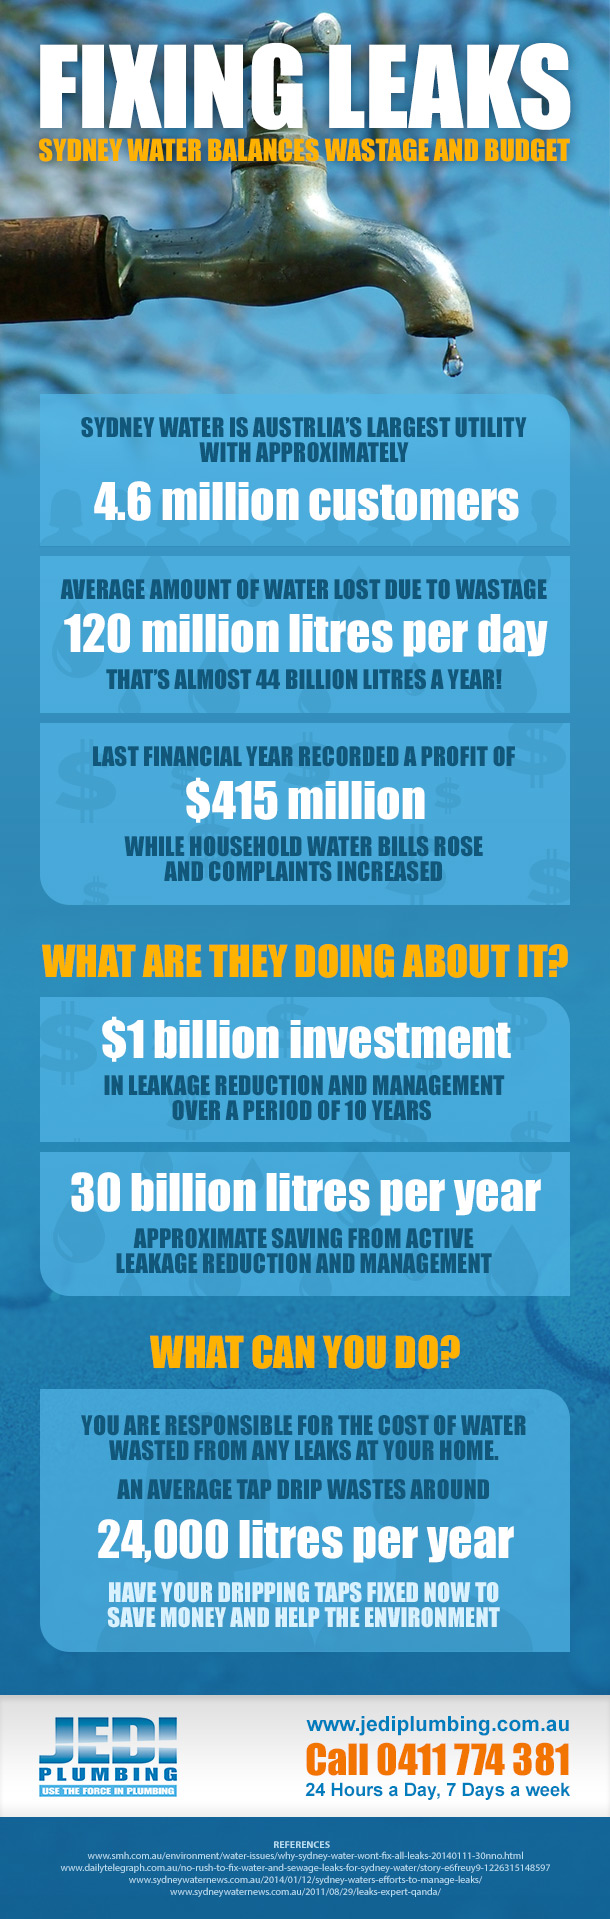 Sydney Water Wastage and Budget Infographic